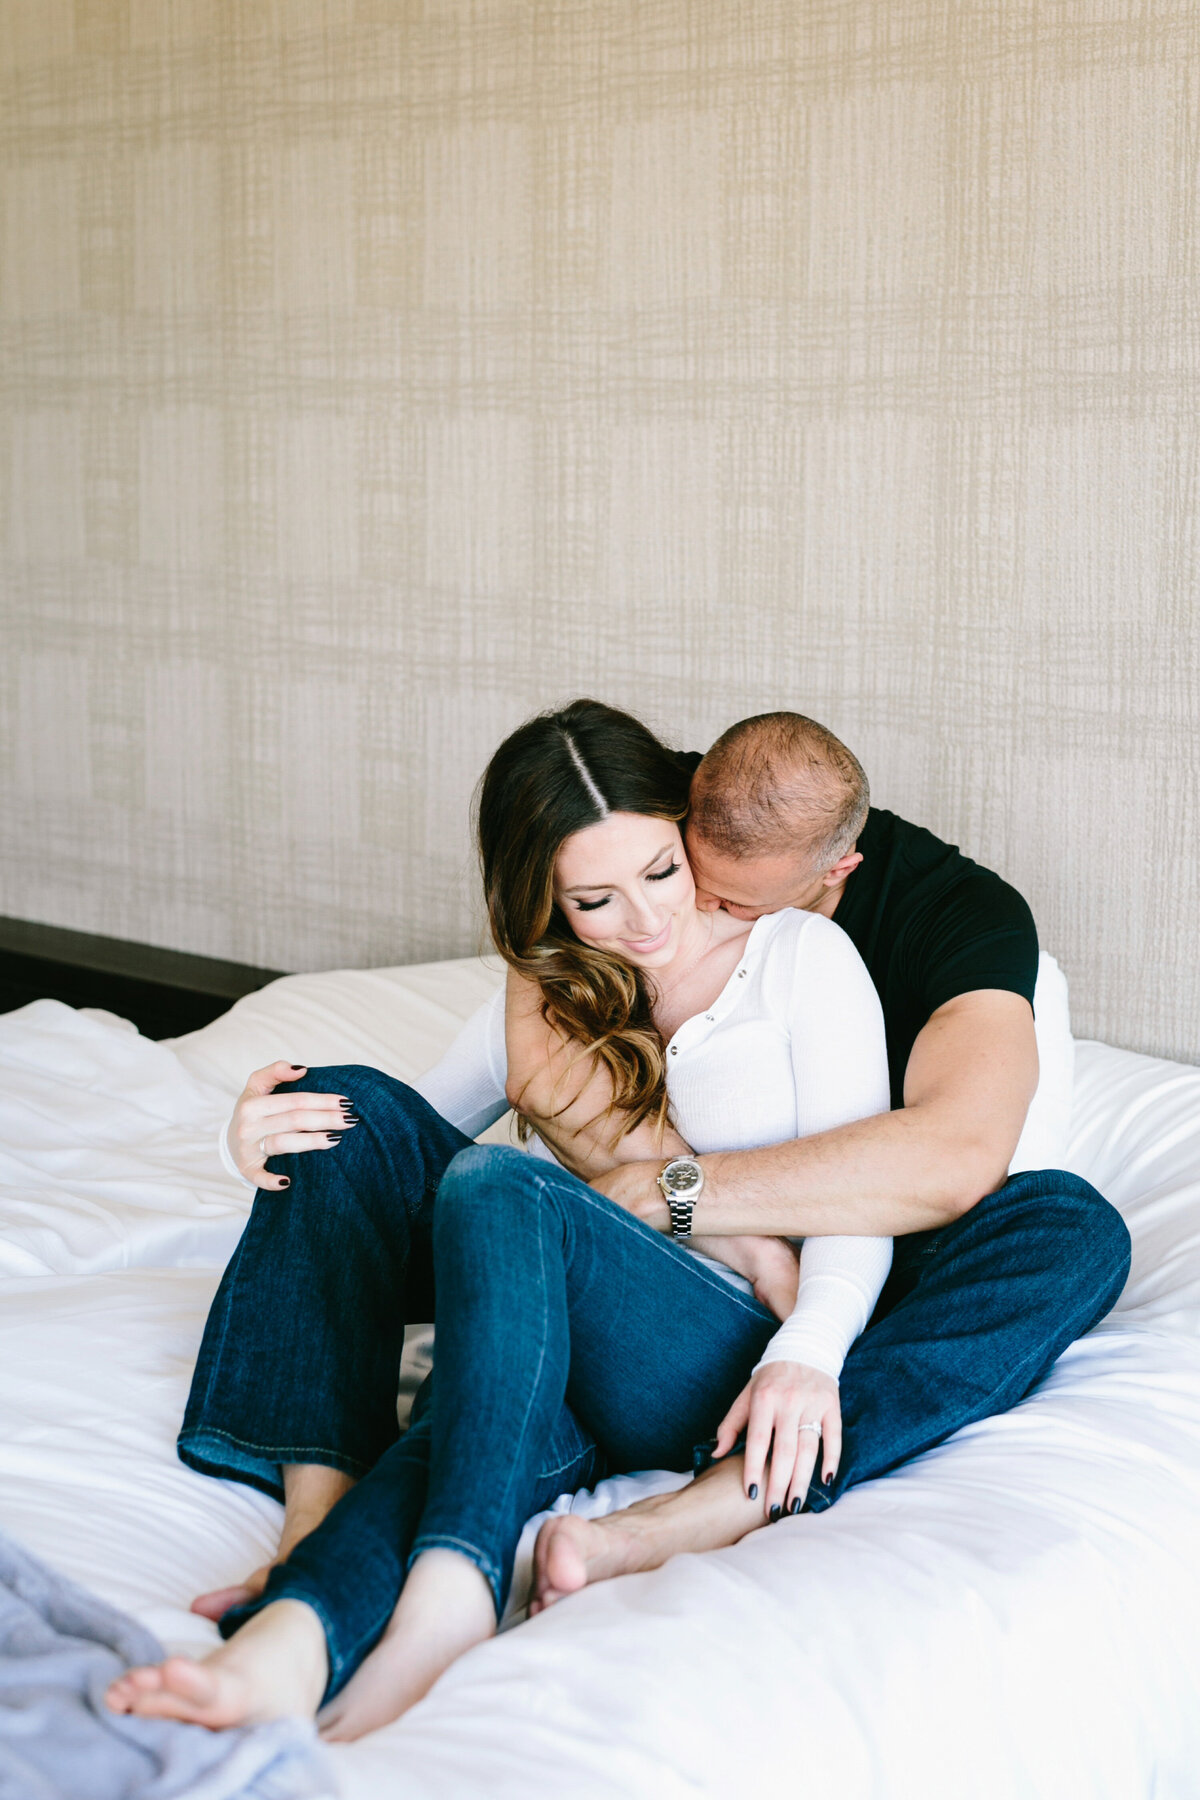 Best California and Texas Engagement Photographer-Jodee Debes Photography-225